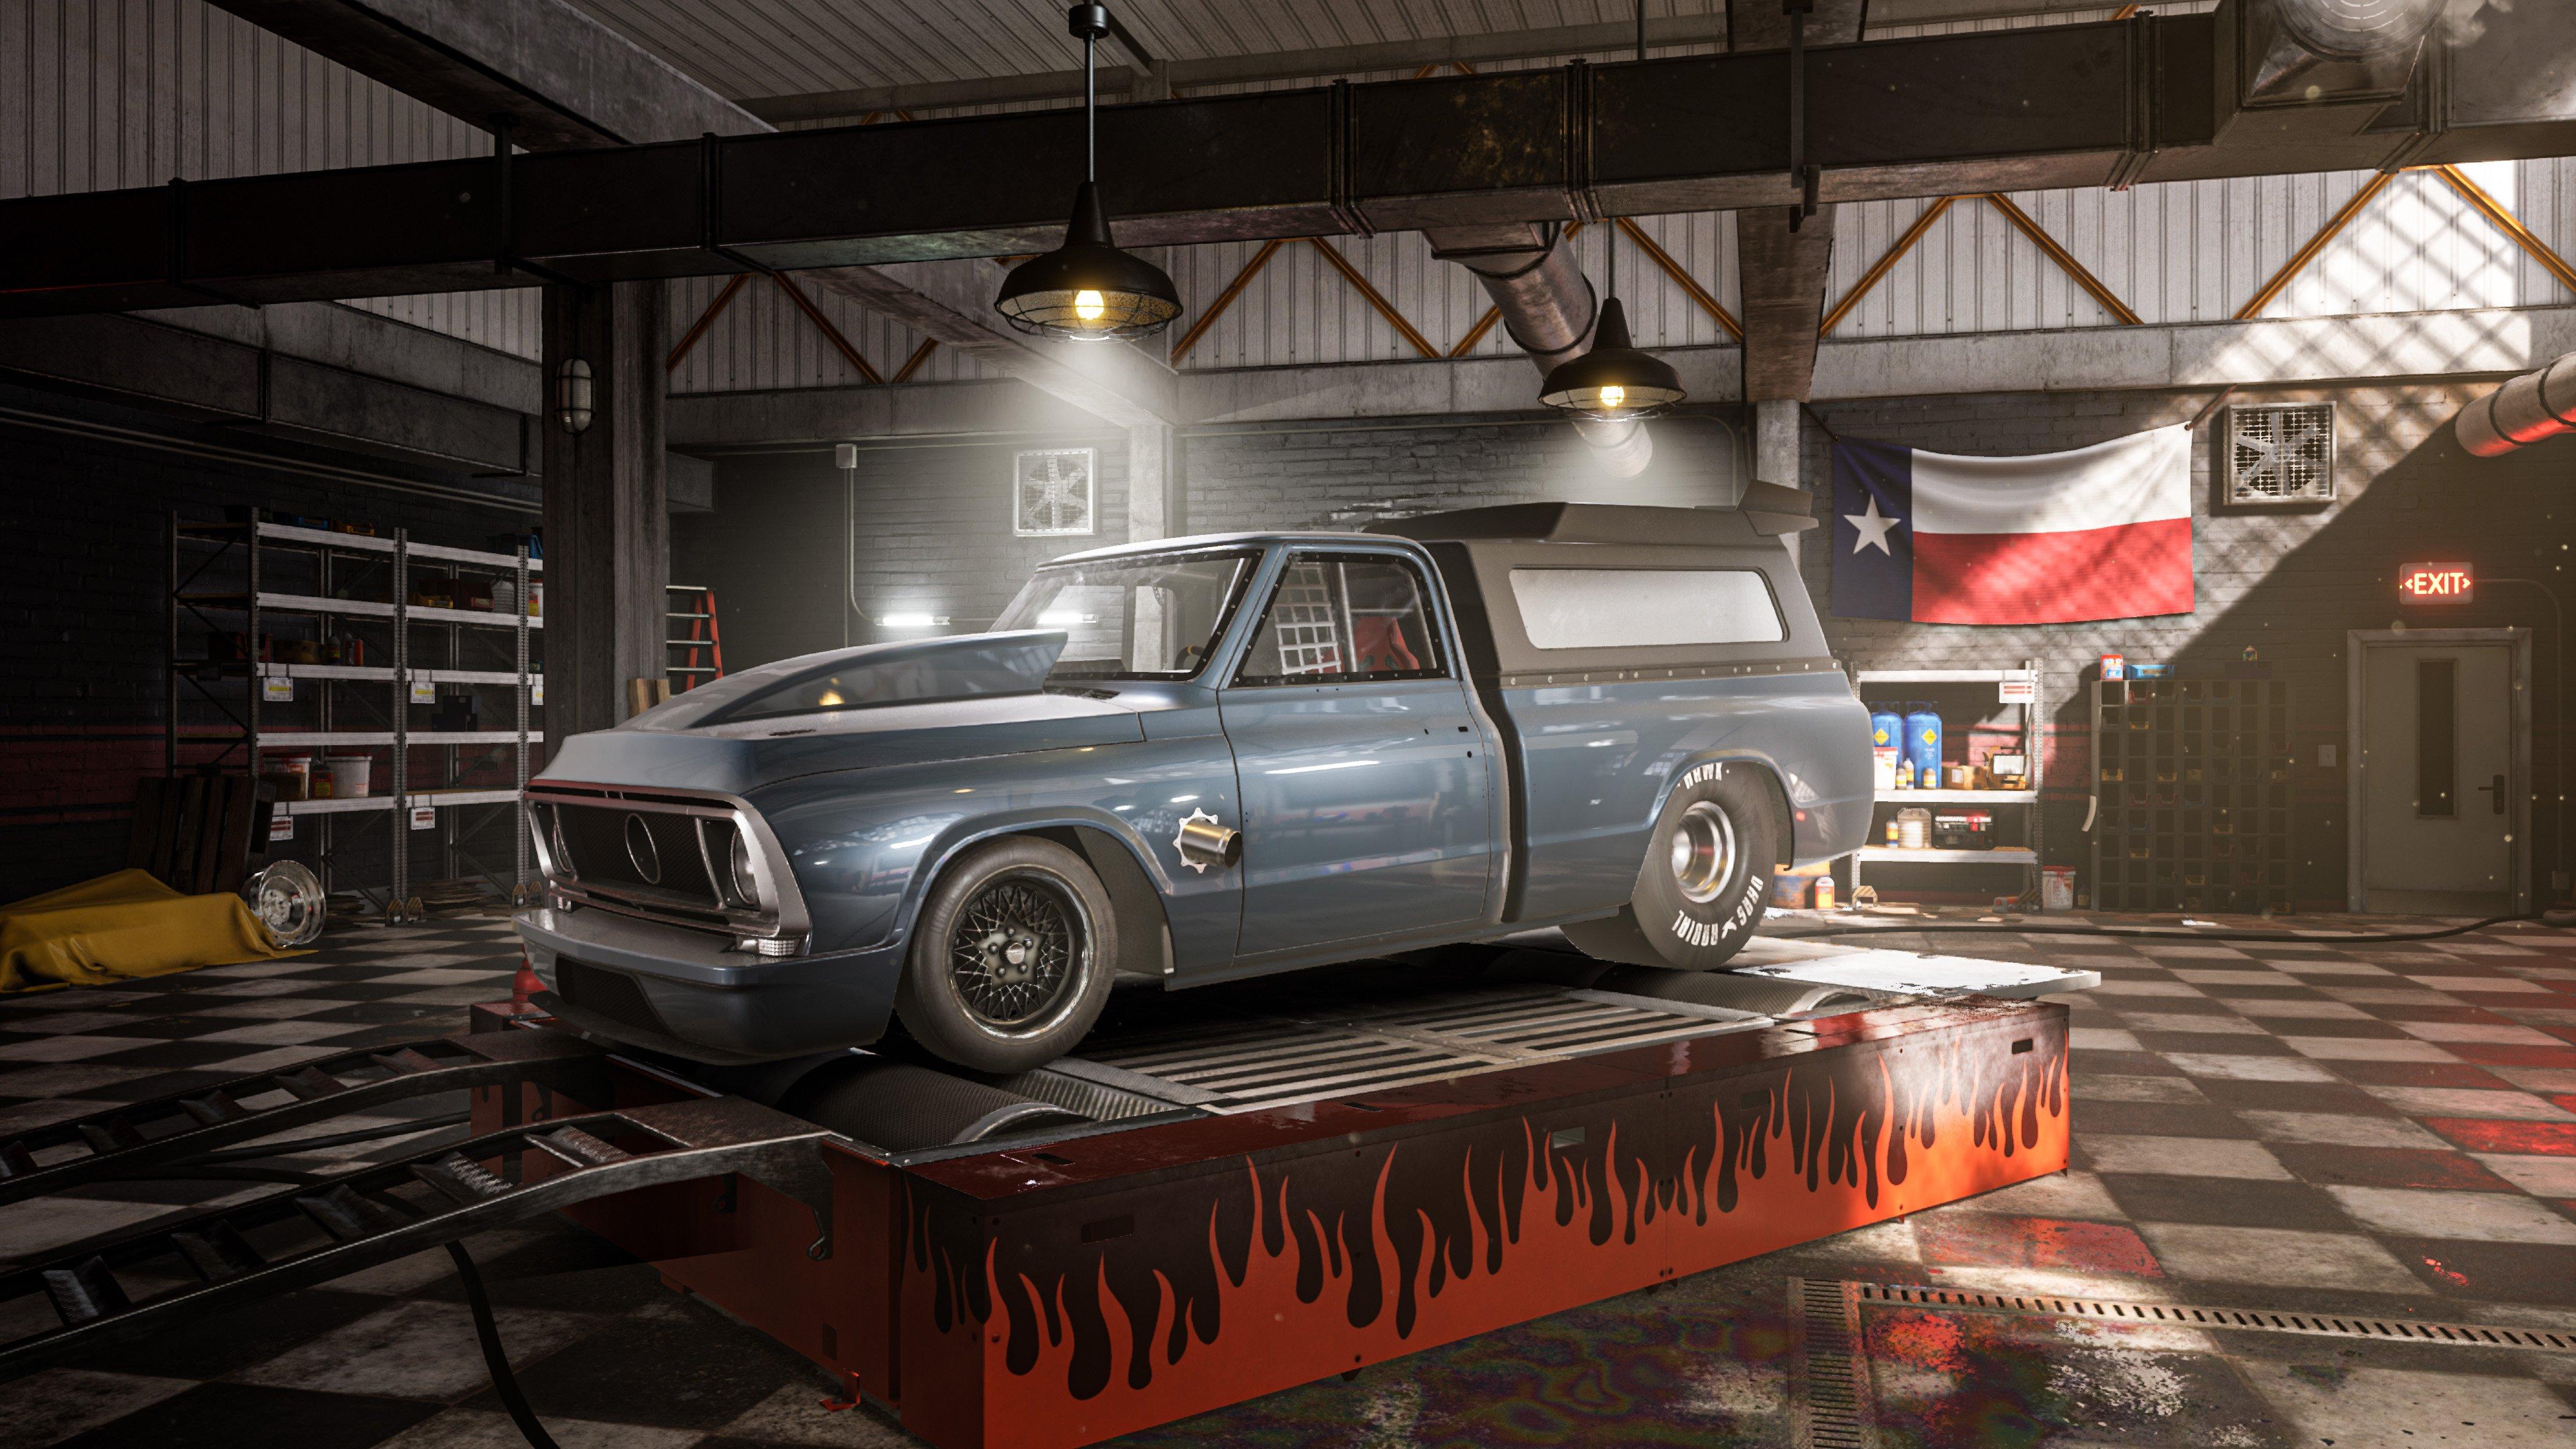 Street Outlaws 2: Winner Takes All - PlayStation 5